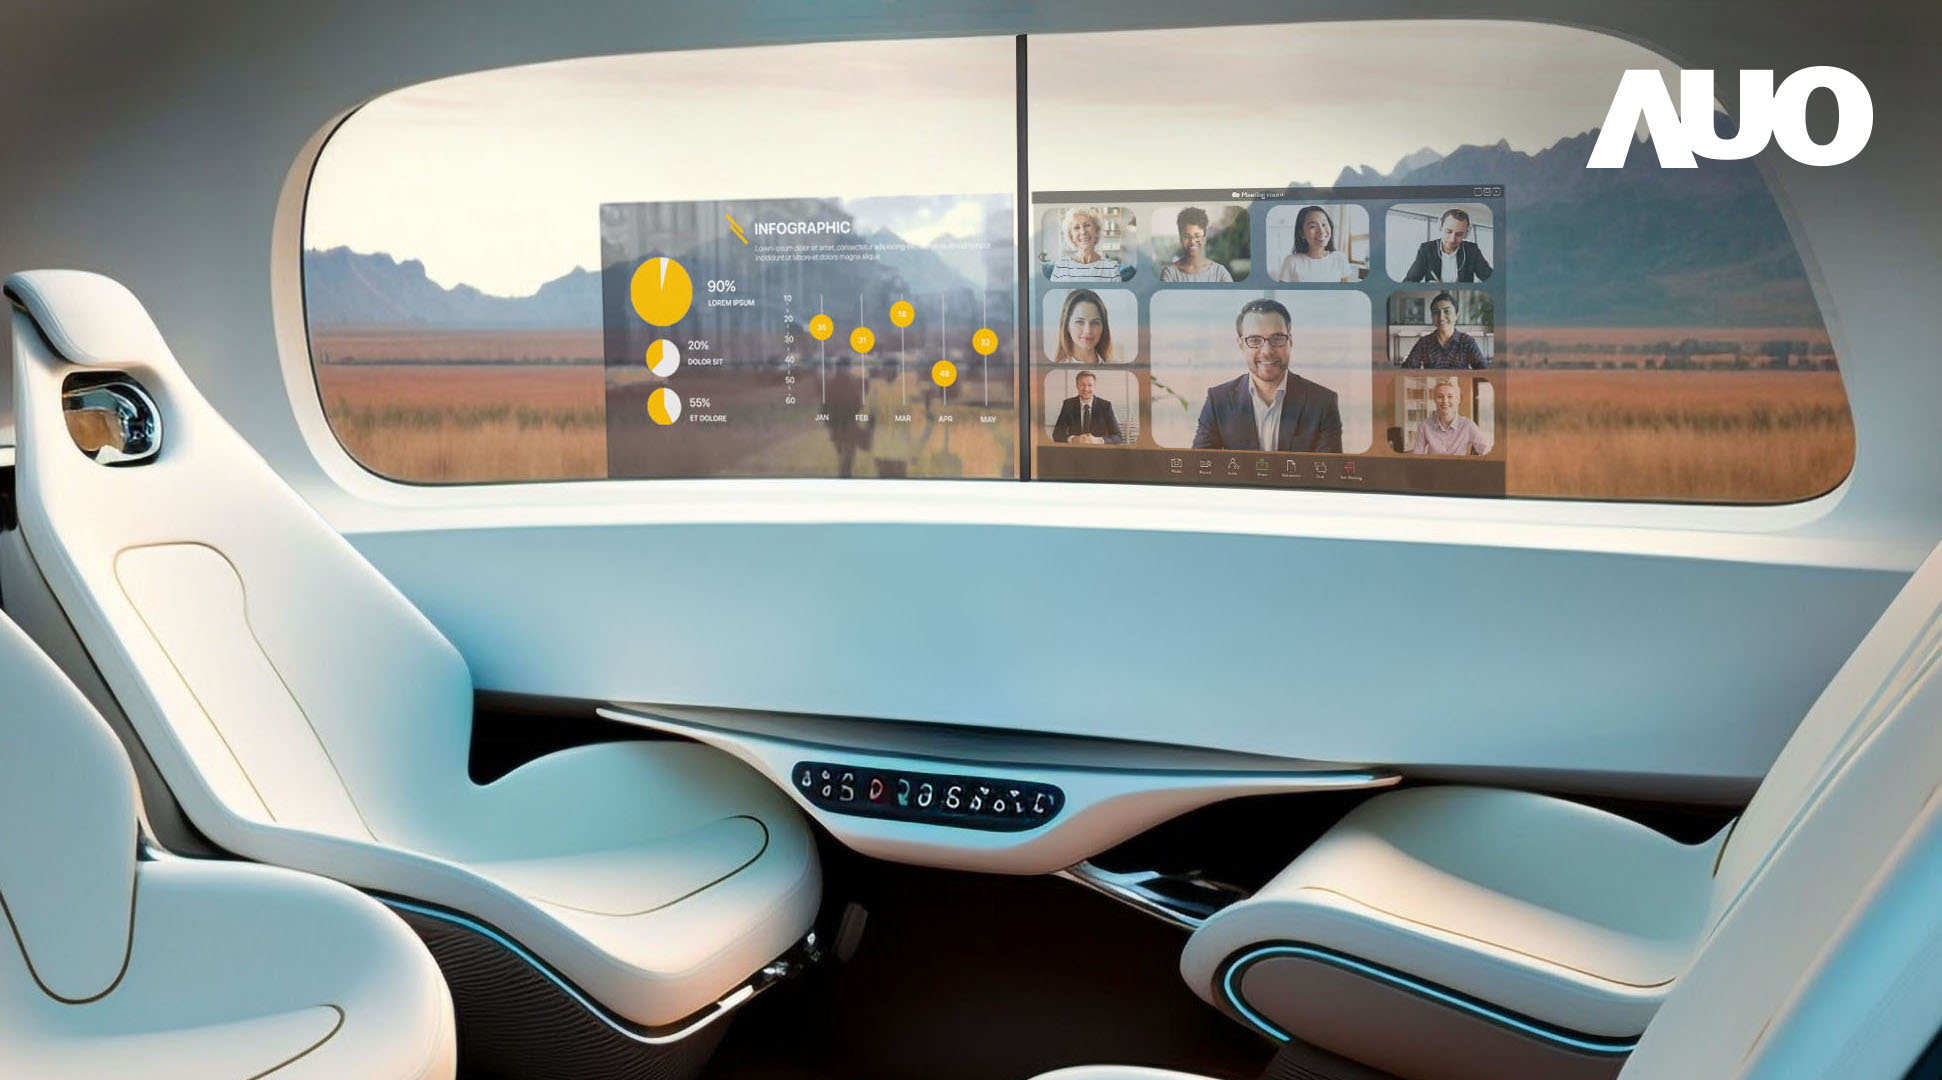 The Interactive Transparent Window, which integrates high transparency, high-brightness, and clear Micro LED displays into vehicle side windows, received recognition as a CES Best of Innovation Awards Honoree